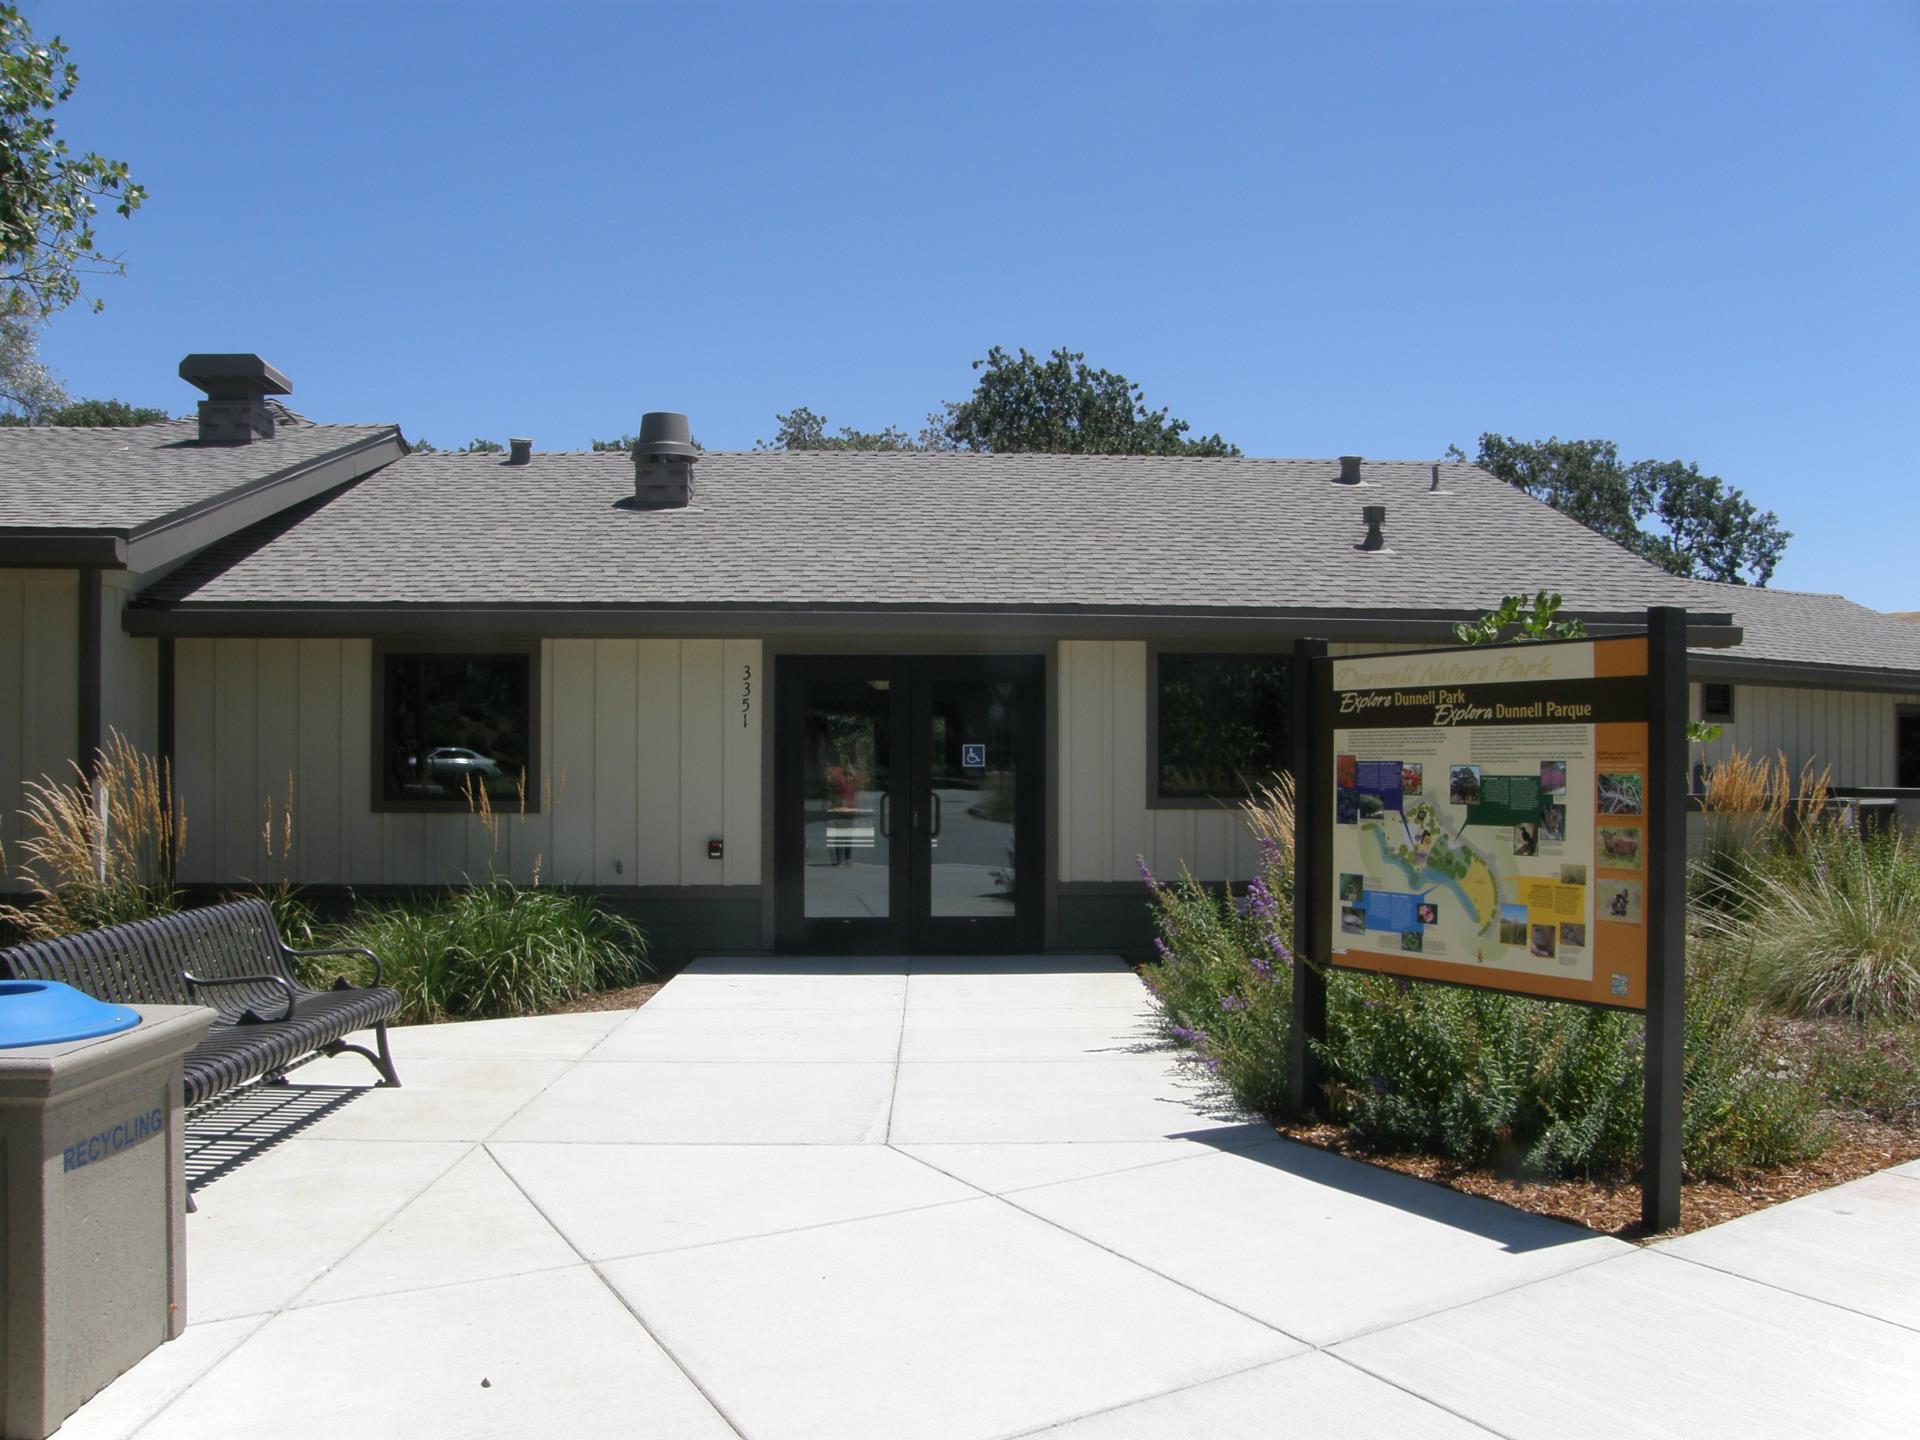 Dunnell Nature Center Building